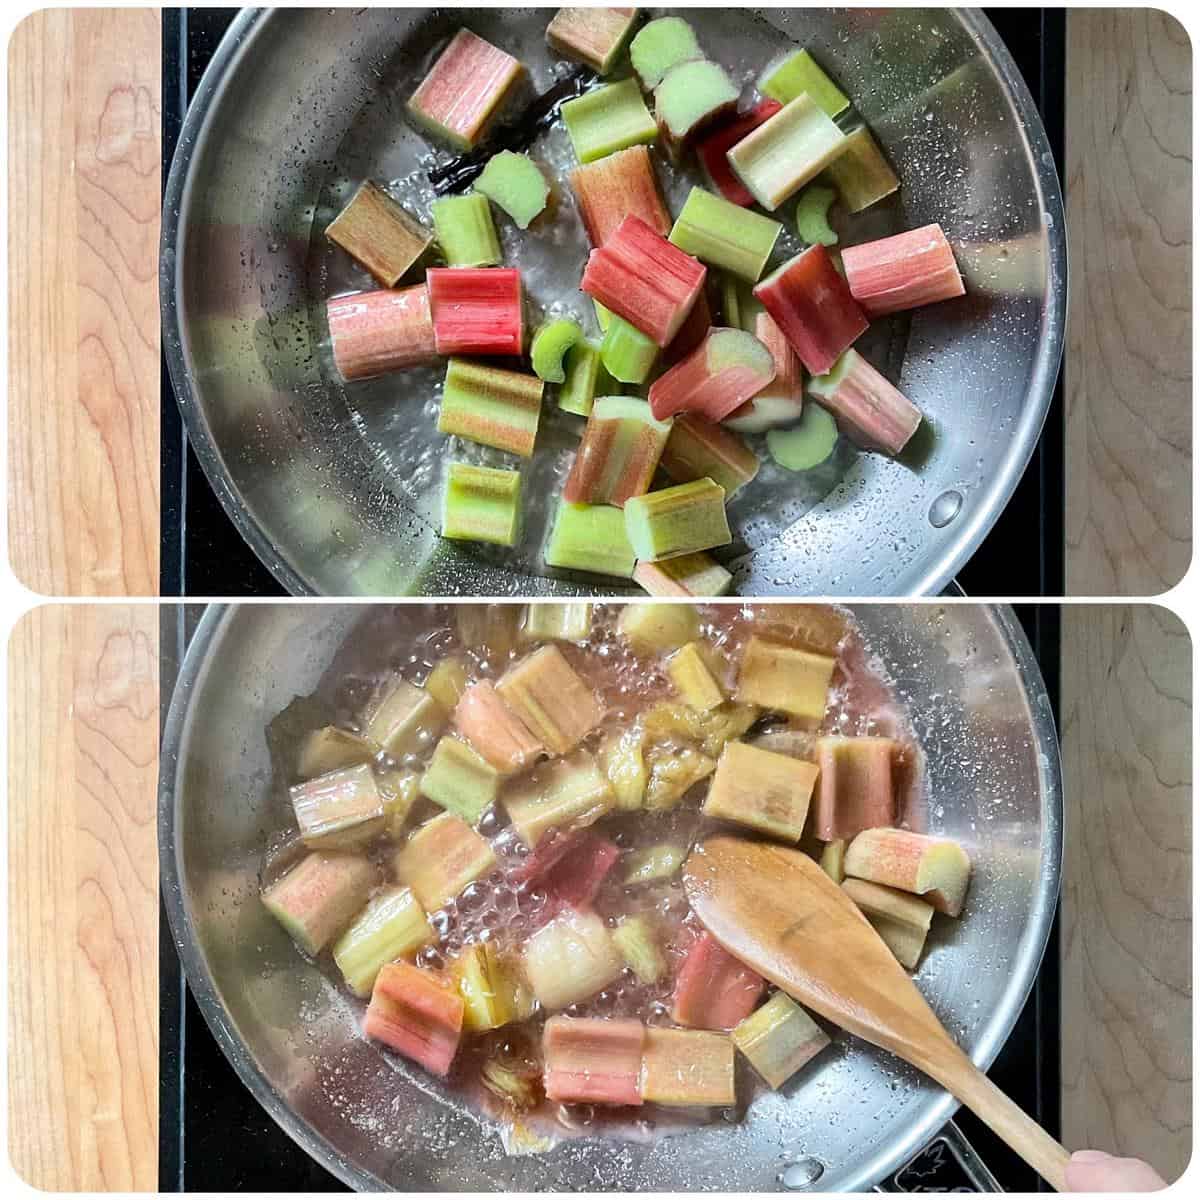 A photo collage of rhubarb being added to a saucepan.